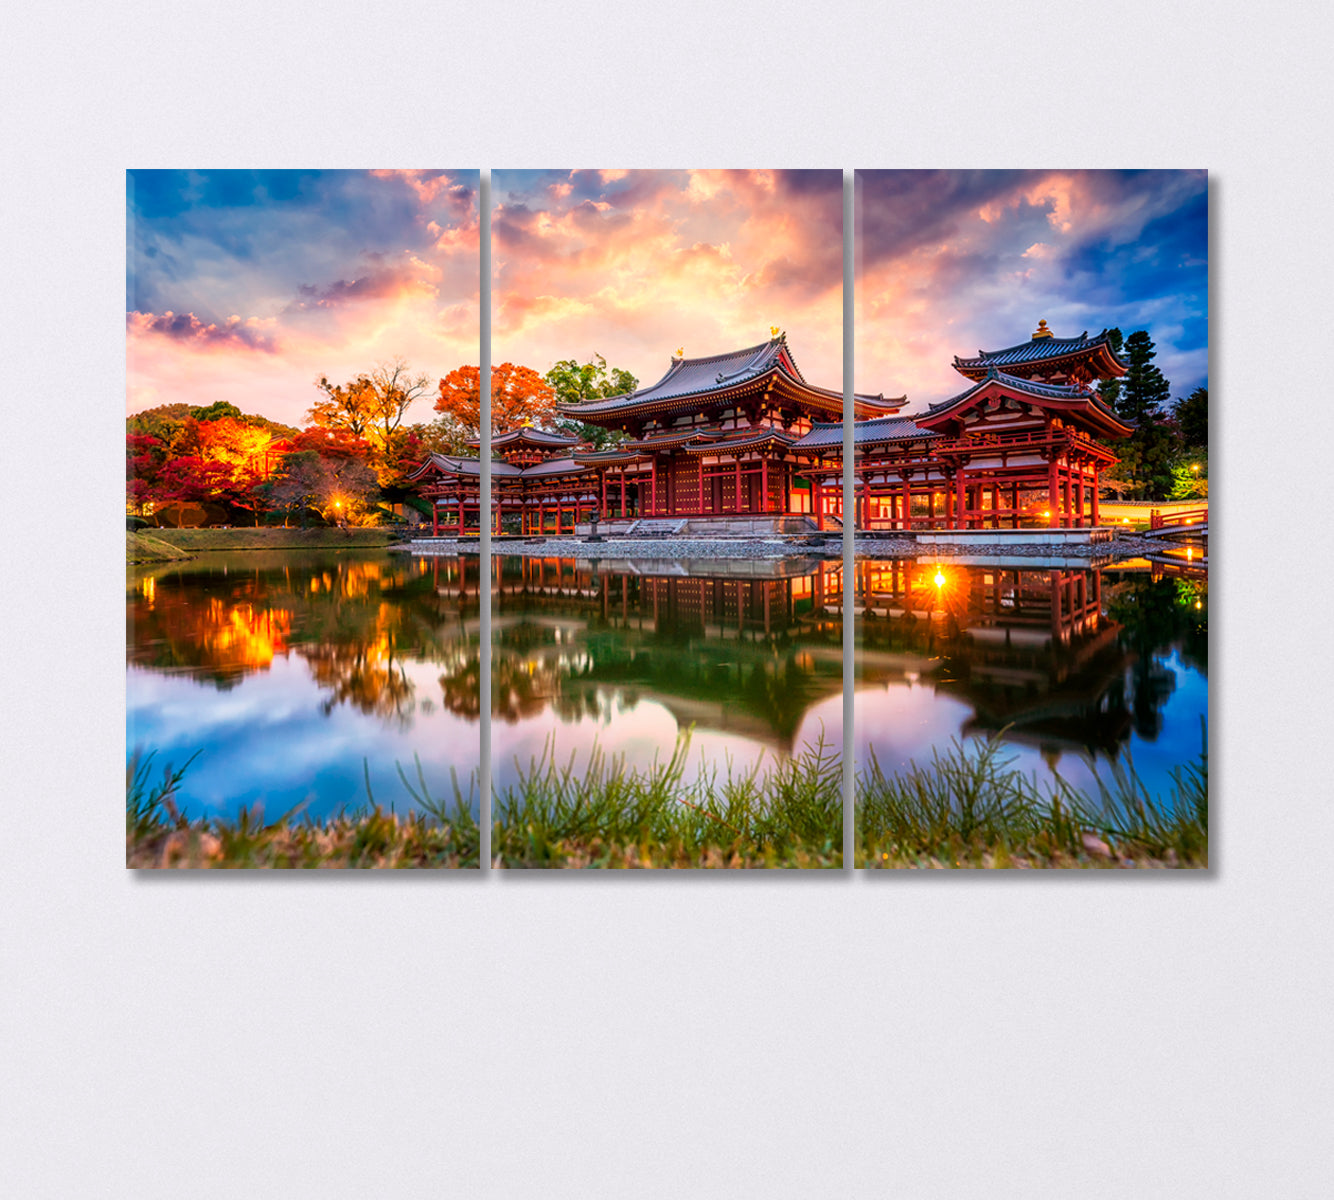 Byodo-in Buddhist Temple in Uji Japan Canvas Print-Canvas Print-CetArt-3 Panels-36x24 inches-CetArt